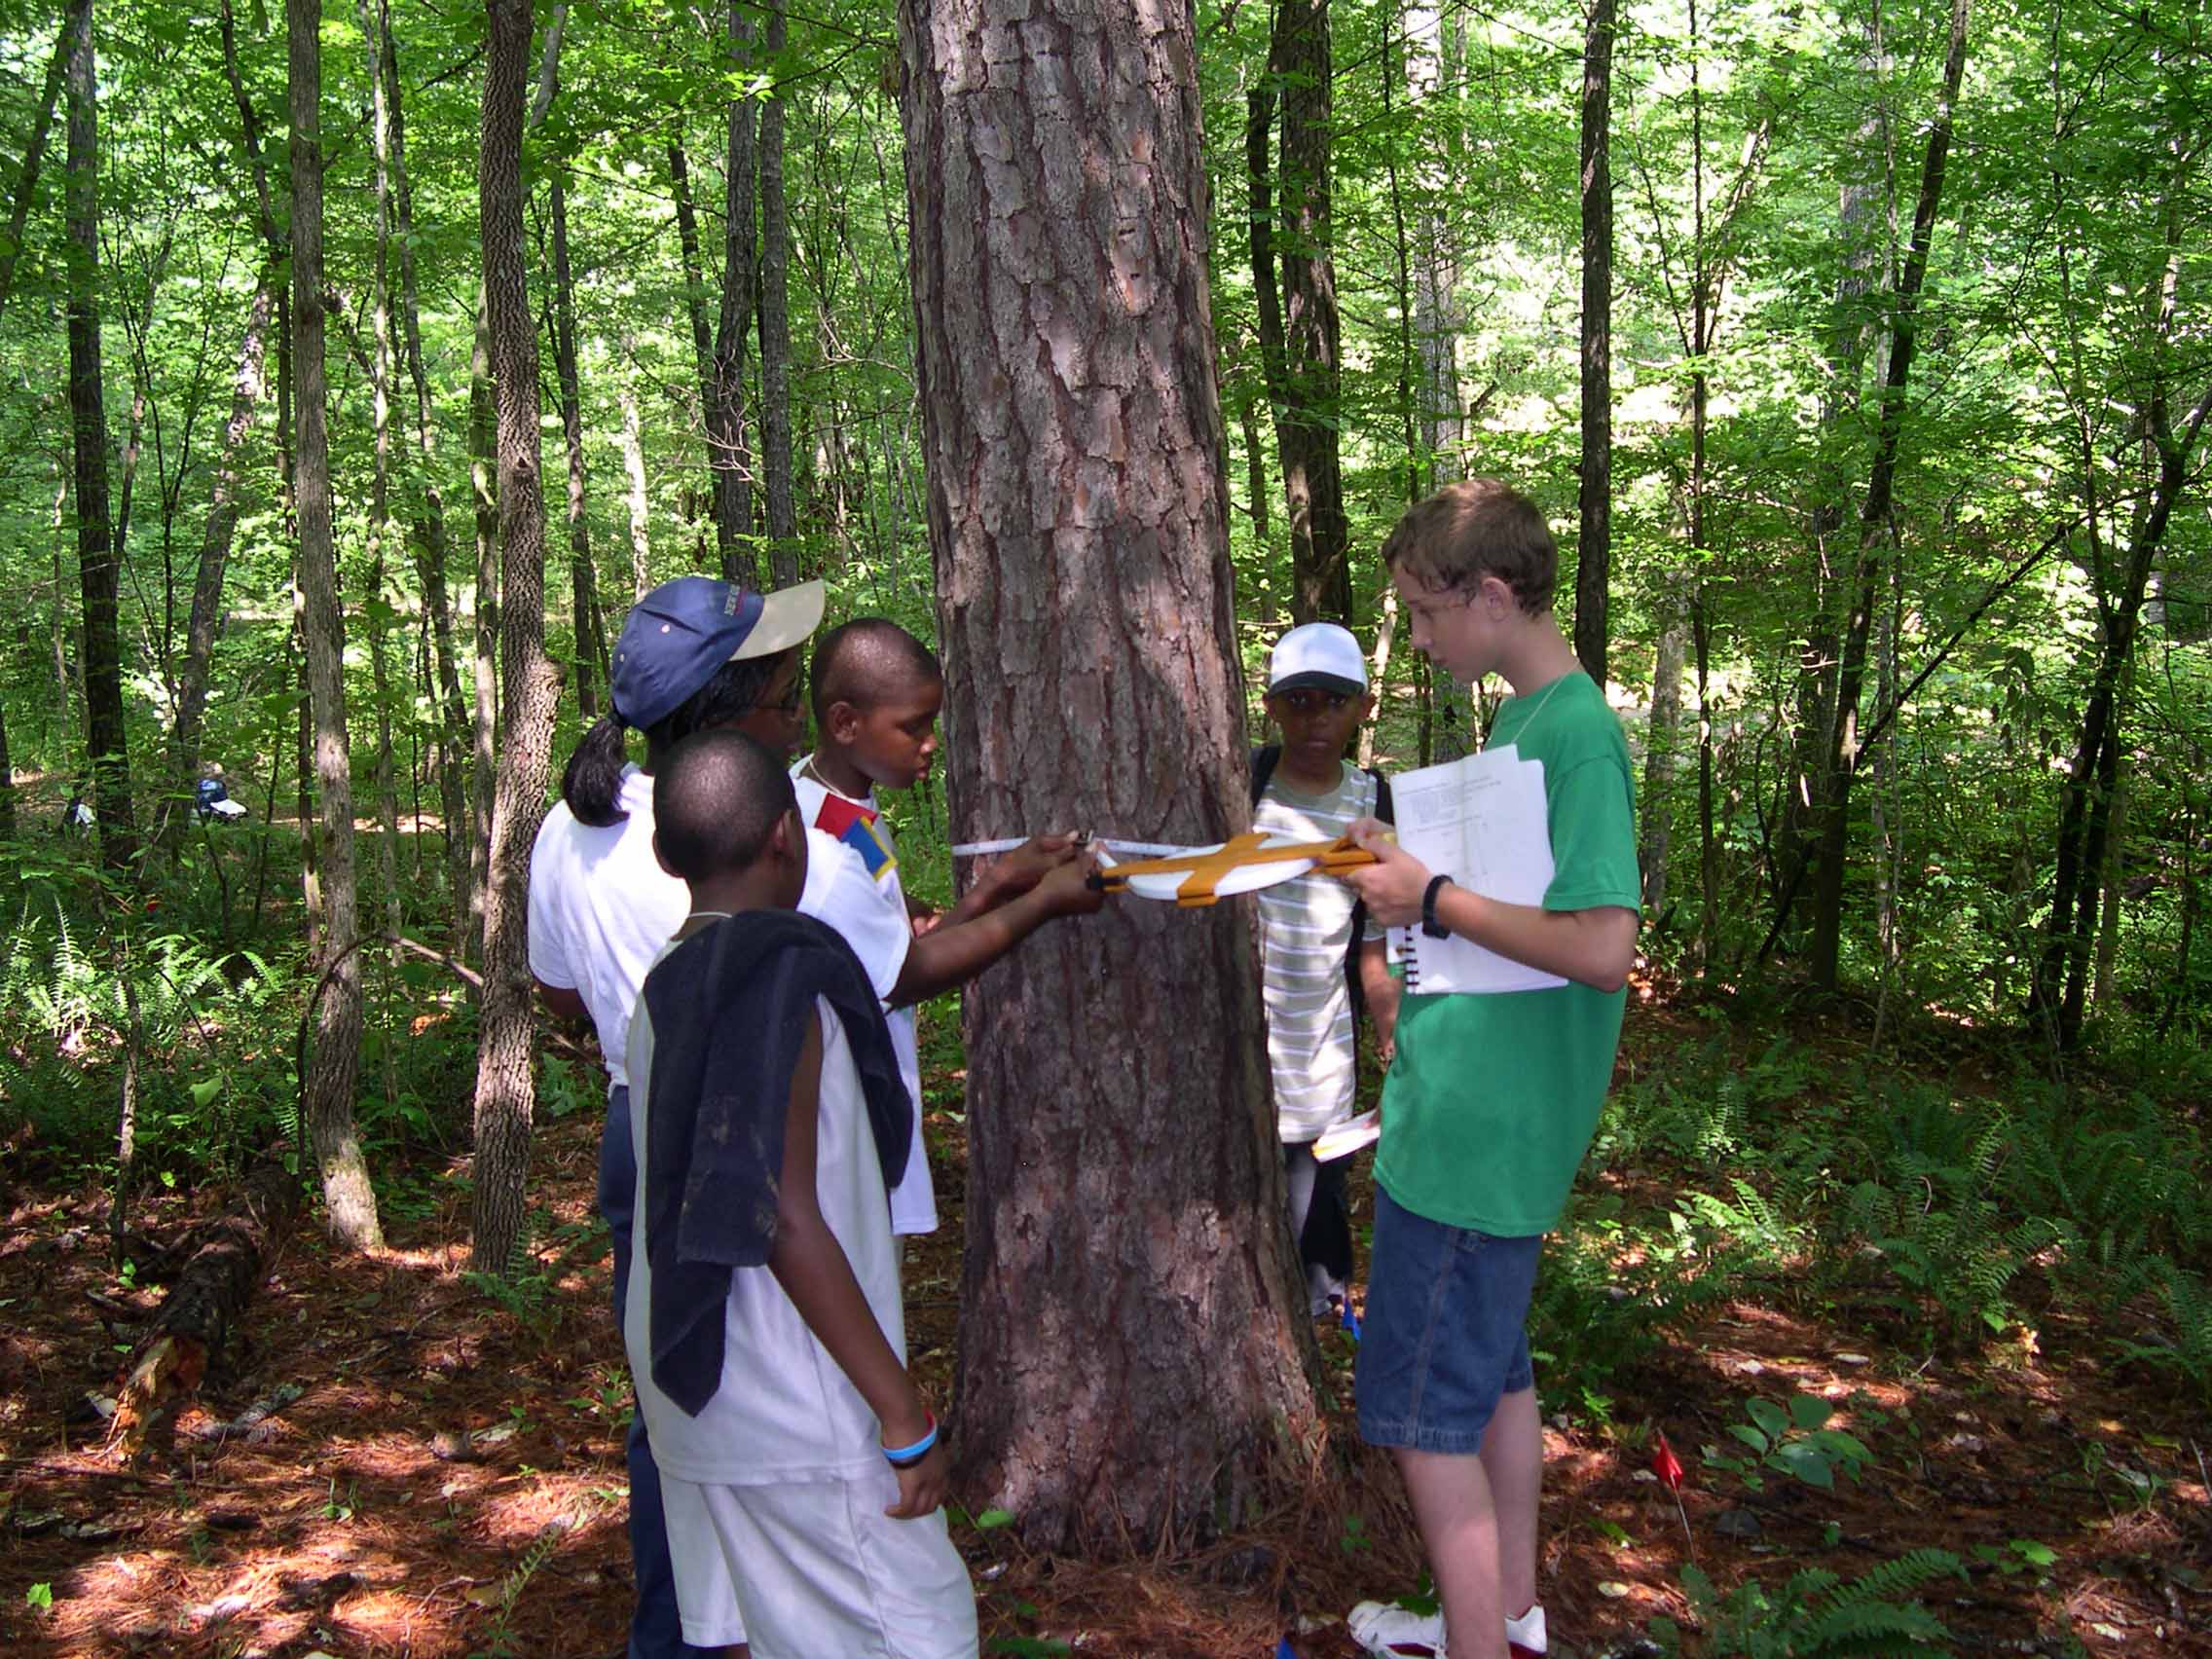 measuring the diameter of a tree